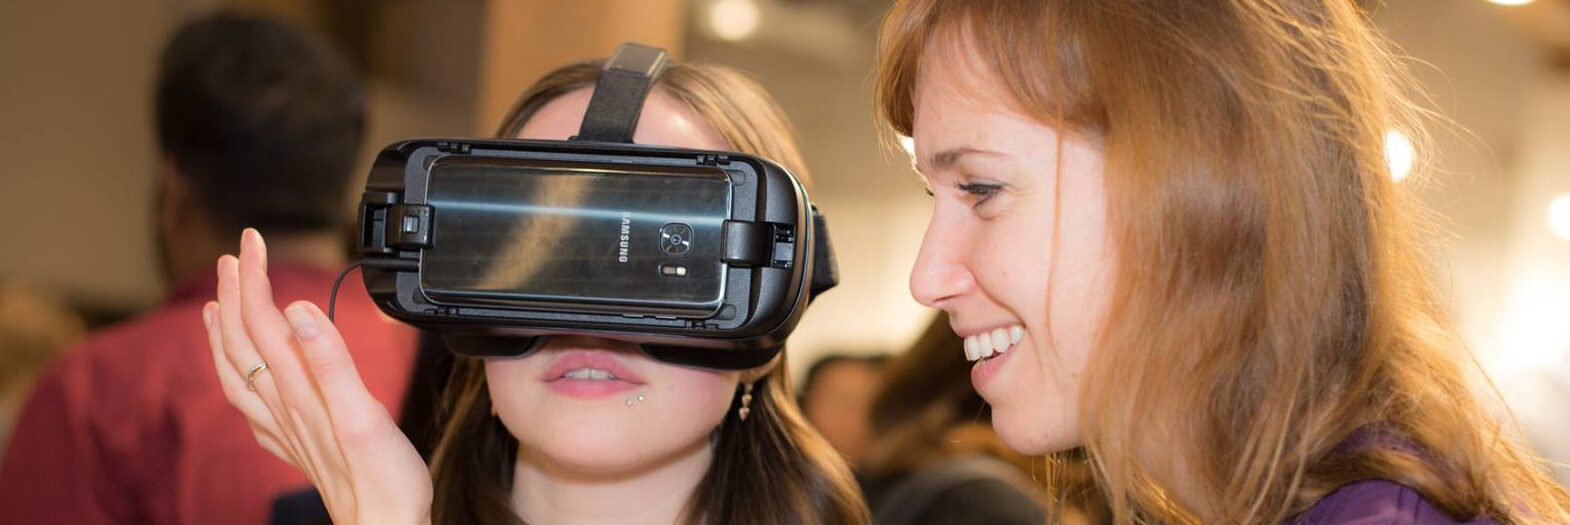 York researcher Lora Appel demonstrates a VR headset during a recent TO Health gathering